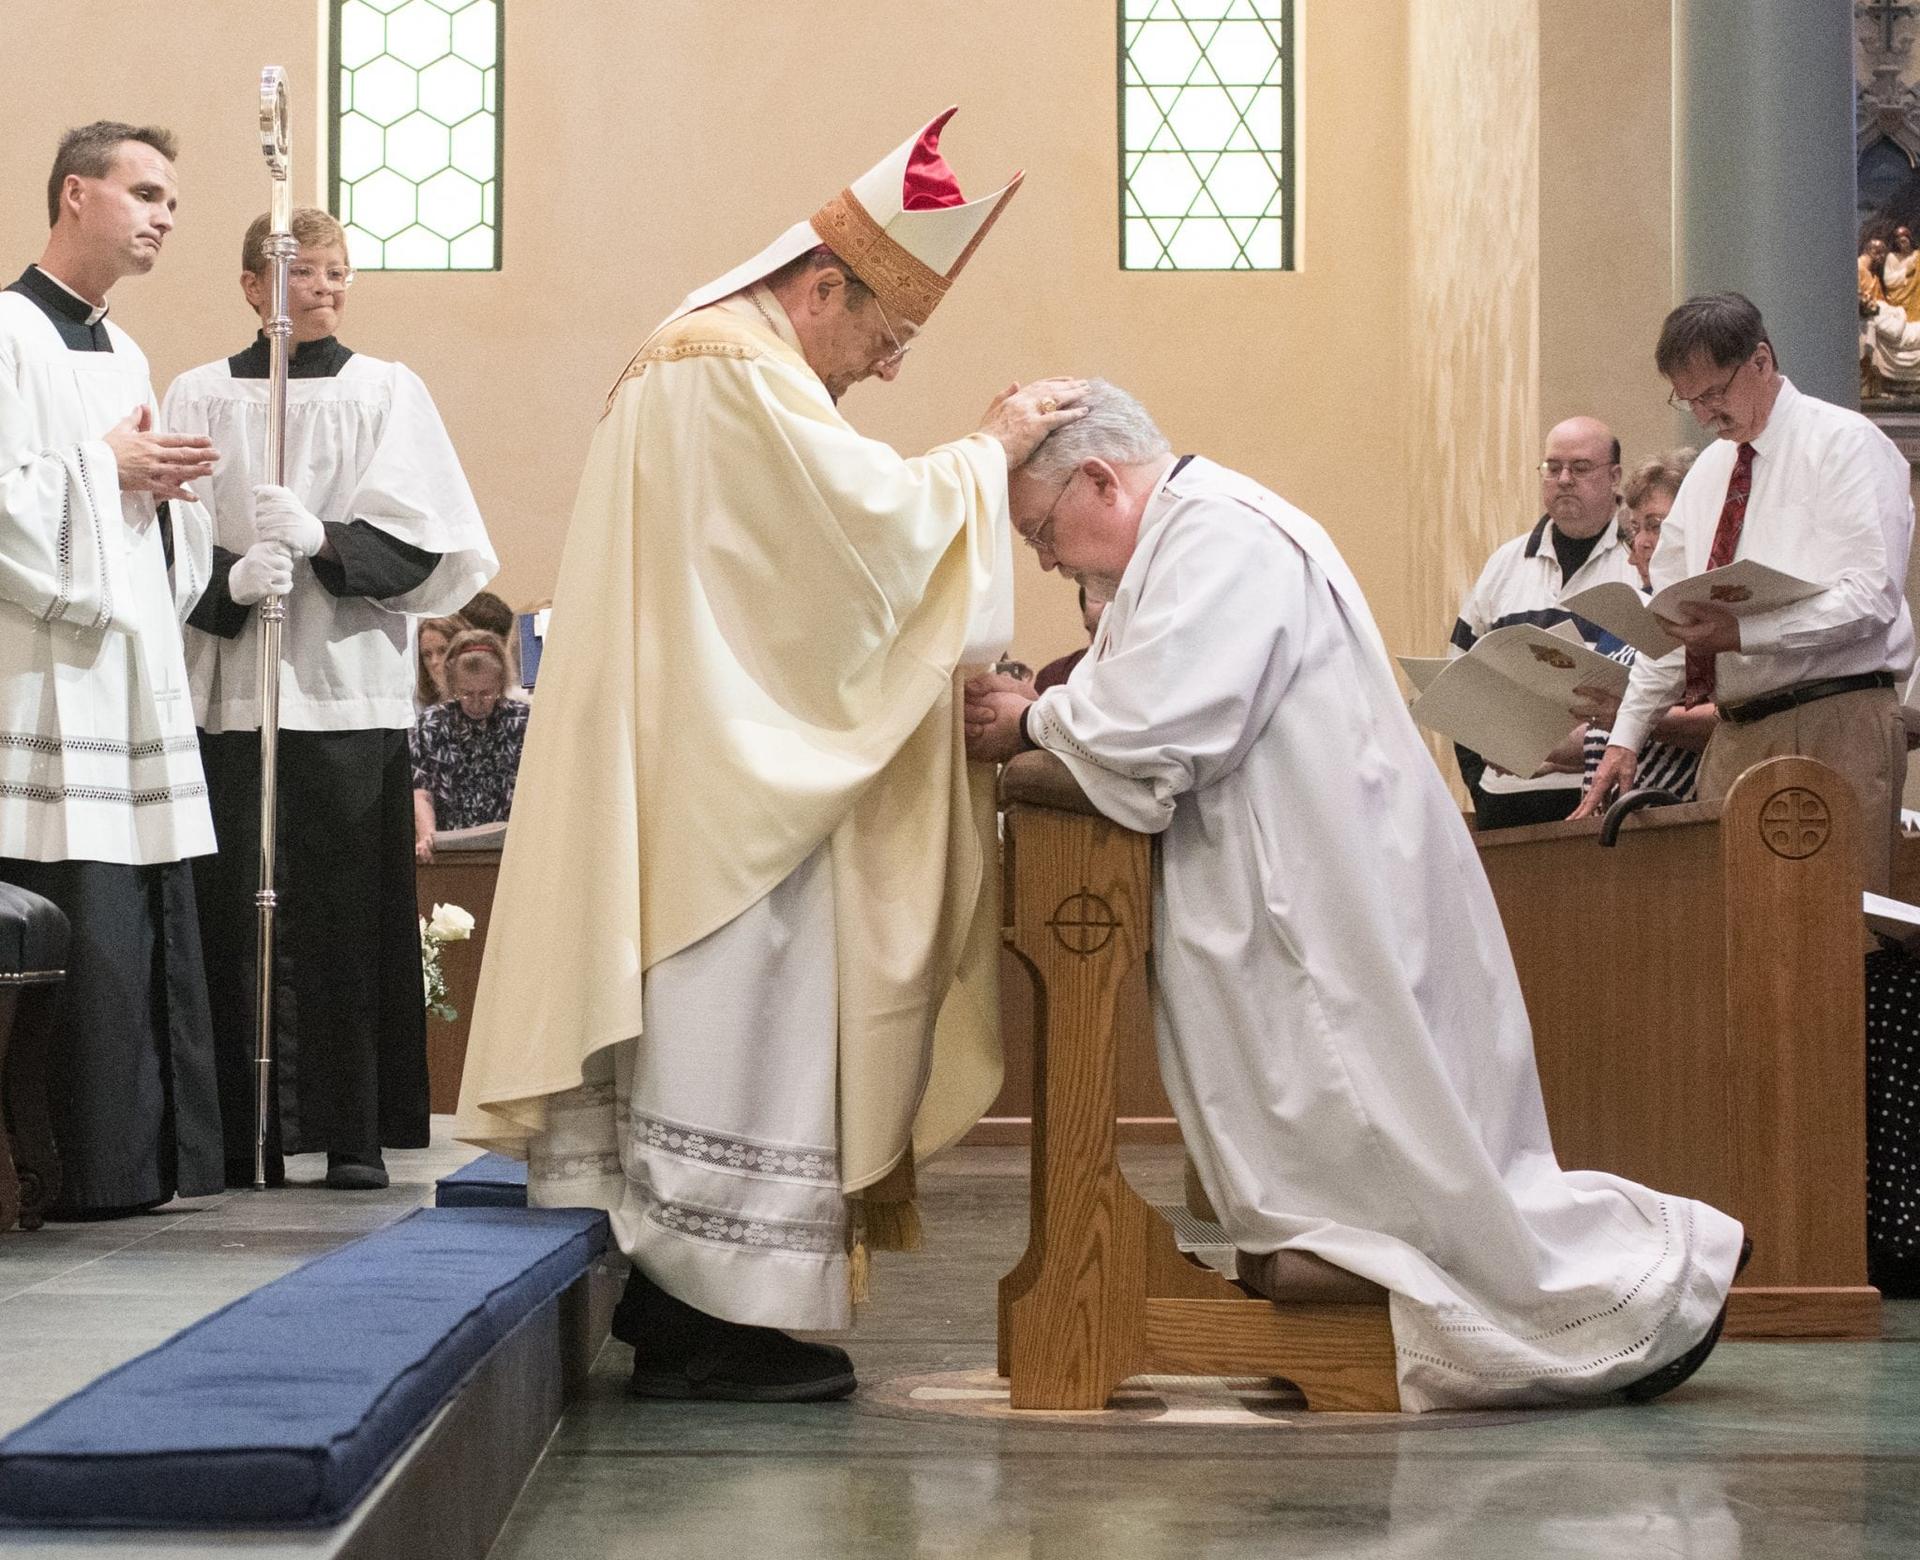 Former Lutheran minister now a priest felt call to ministry at ‘early age’